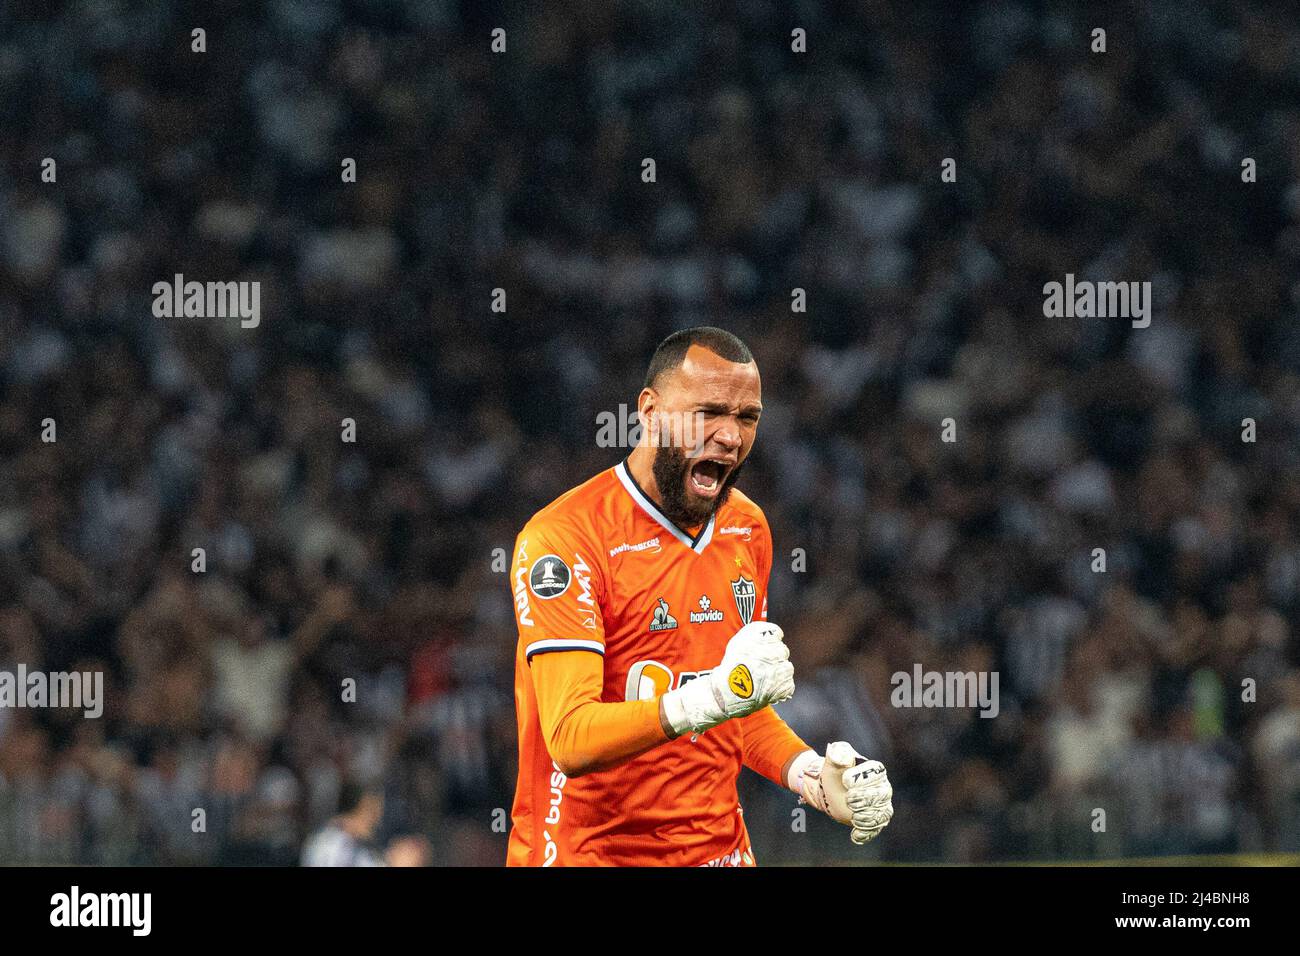 Belo Horizonte, Brazil. 13th Apr, 2022. MG - Belo Horizonte - 04/13/2022 - LIBERTADORES 2022 ATLETICO -MG X AMERICA-MG - Goalkeeper Everson of Atletico-MG celebrates his teammate's goal during a match against America-MG at Mineirao stadium for the Copa Libertadores 2022 championship. Photo: Alessandra Towers/AGIF Credit: AGIF/Alamy Live News Stock Photo